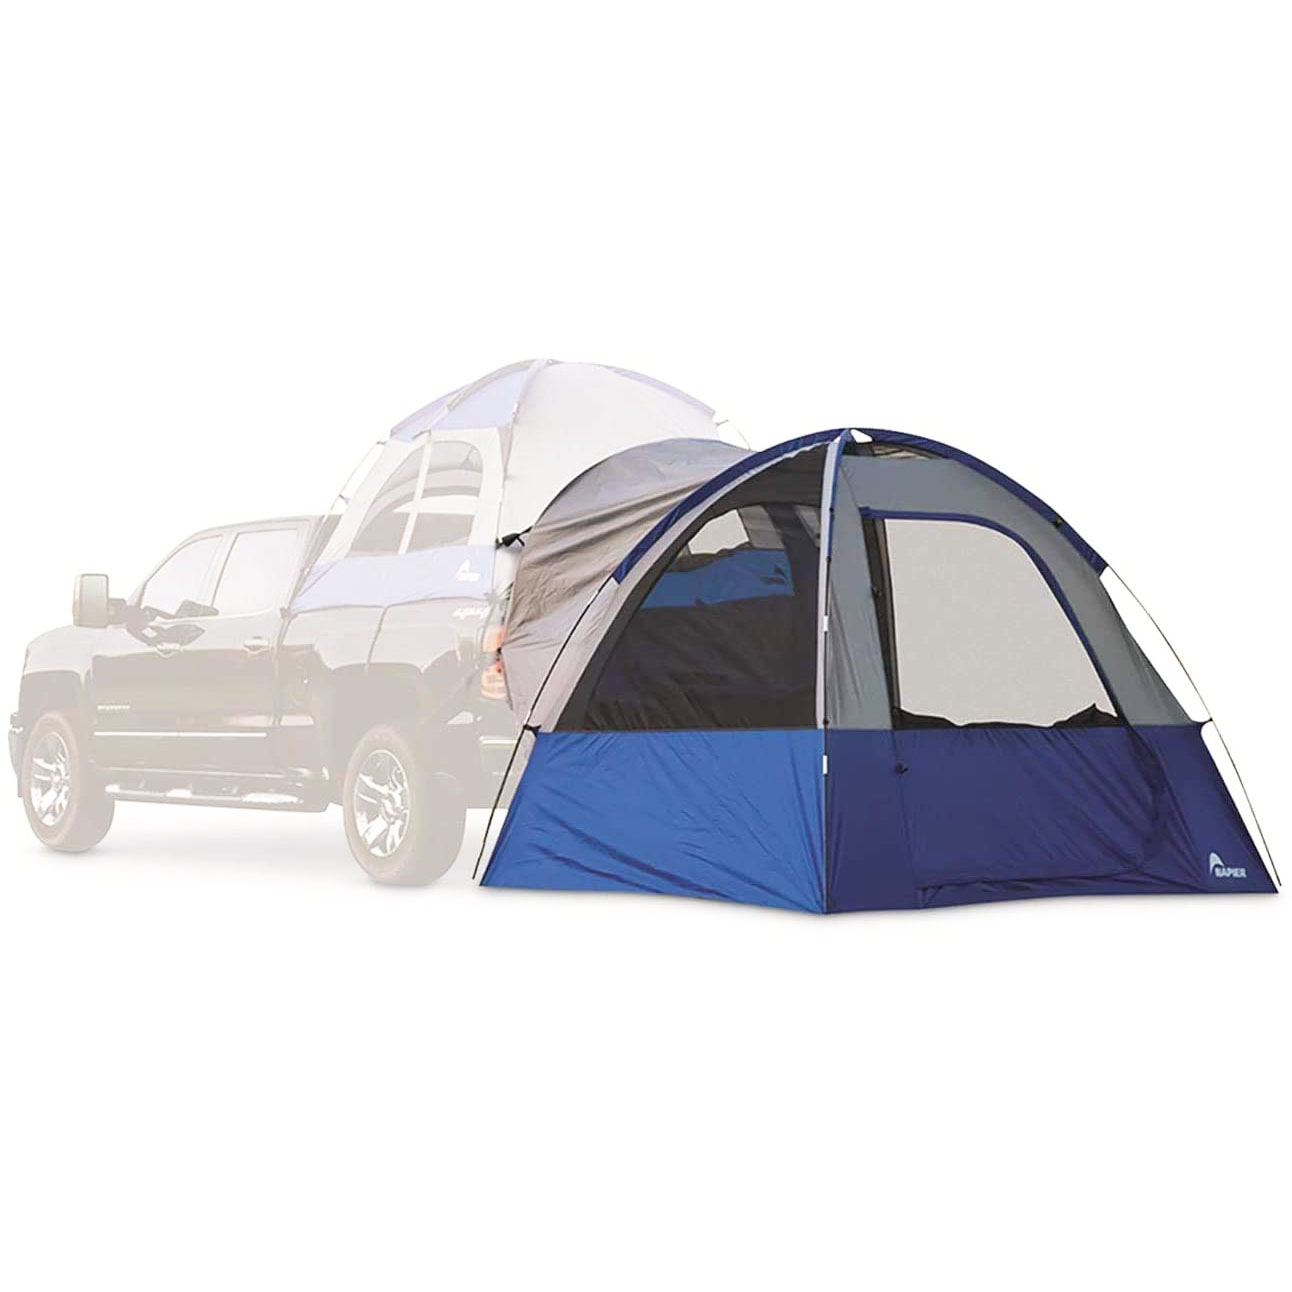 Napier Sportz Link Portable 4 Person Truck Bed Attachment Camping Tent, Blue - image 1 of 6